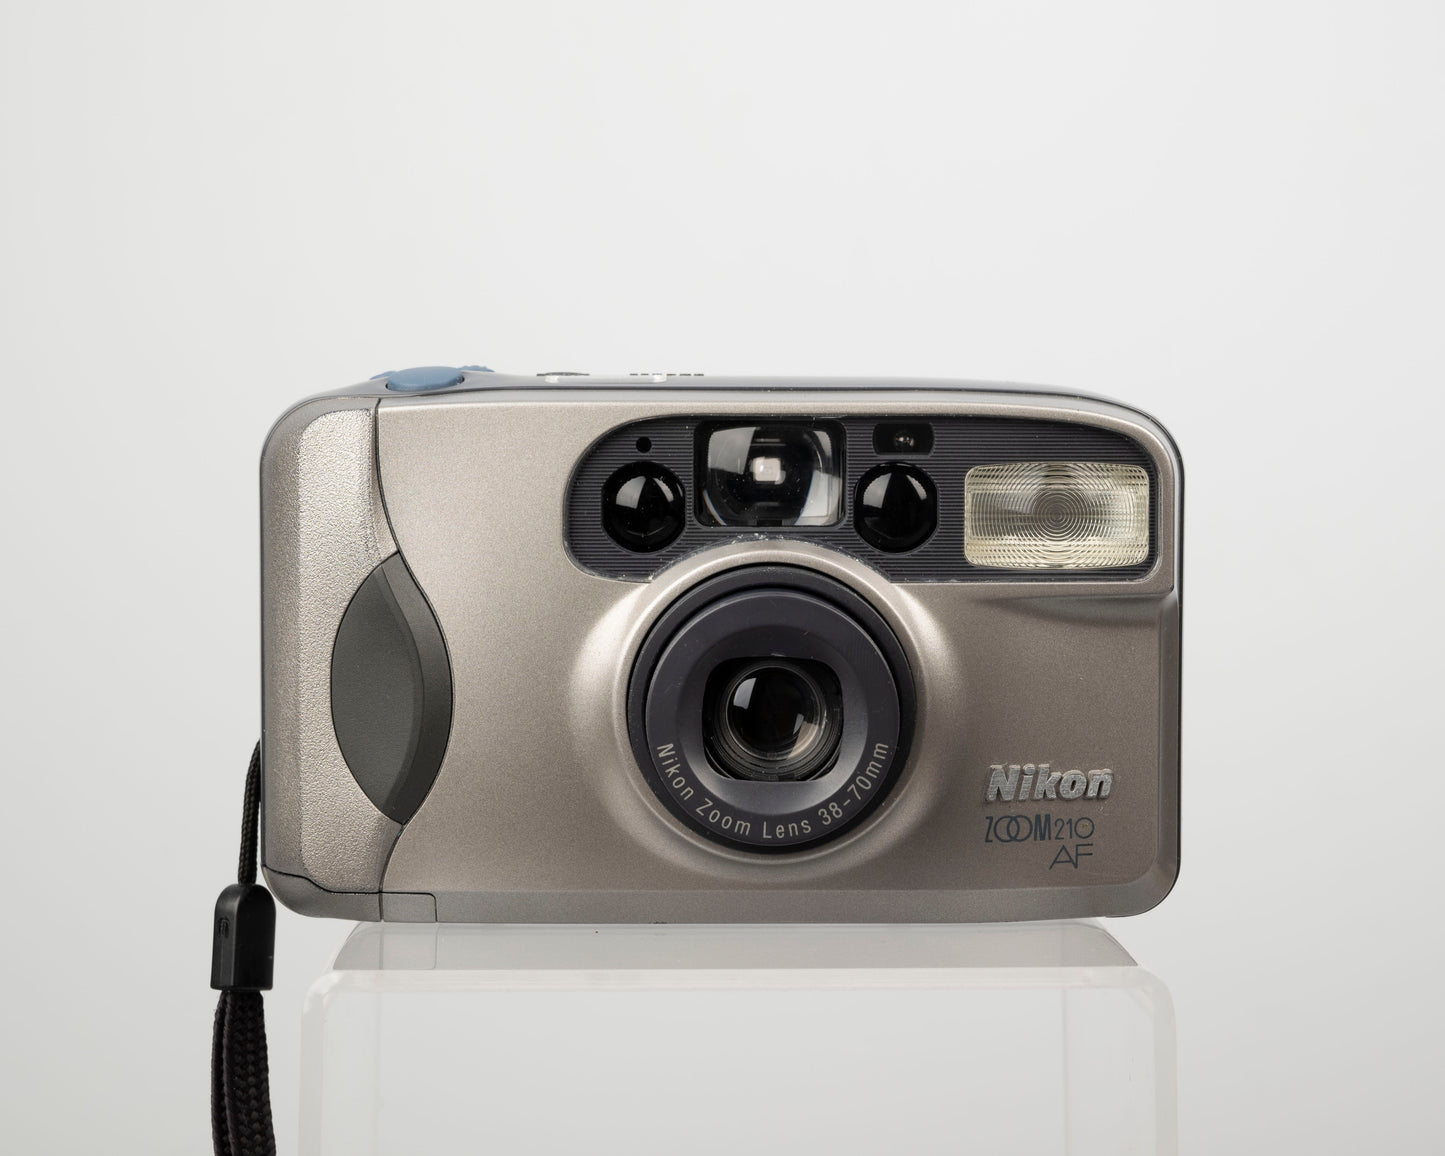 The Nikon Zoom 210AF (also called the One Touch Zoom 70) is a quality 35mm point-and-shoot camera from 1997